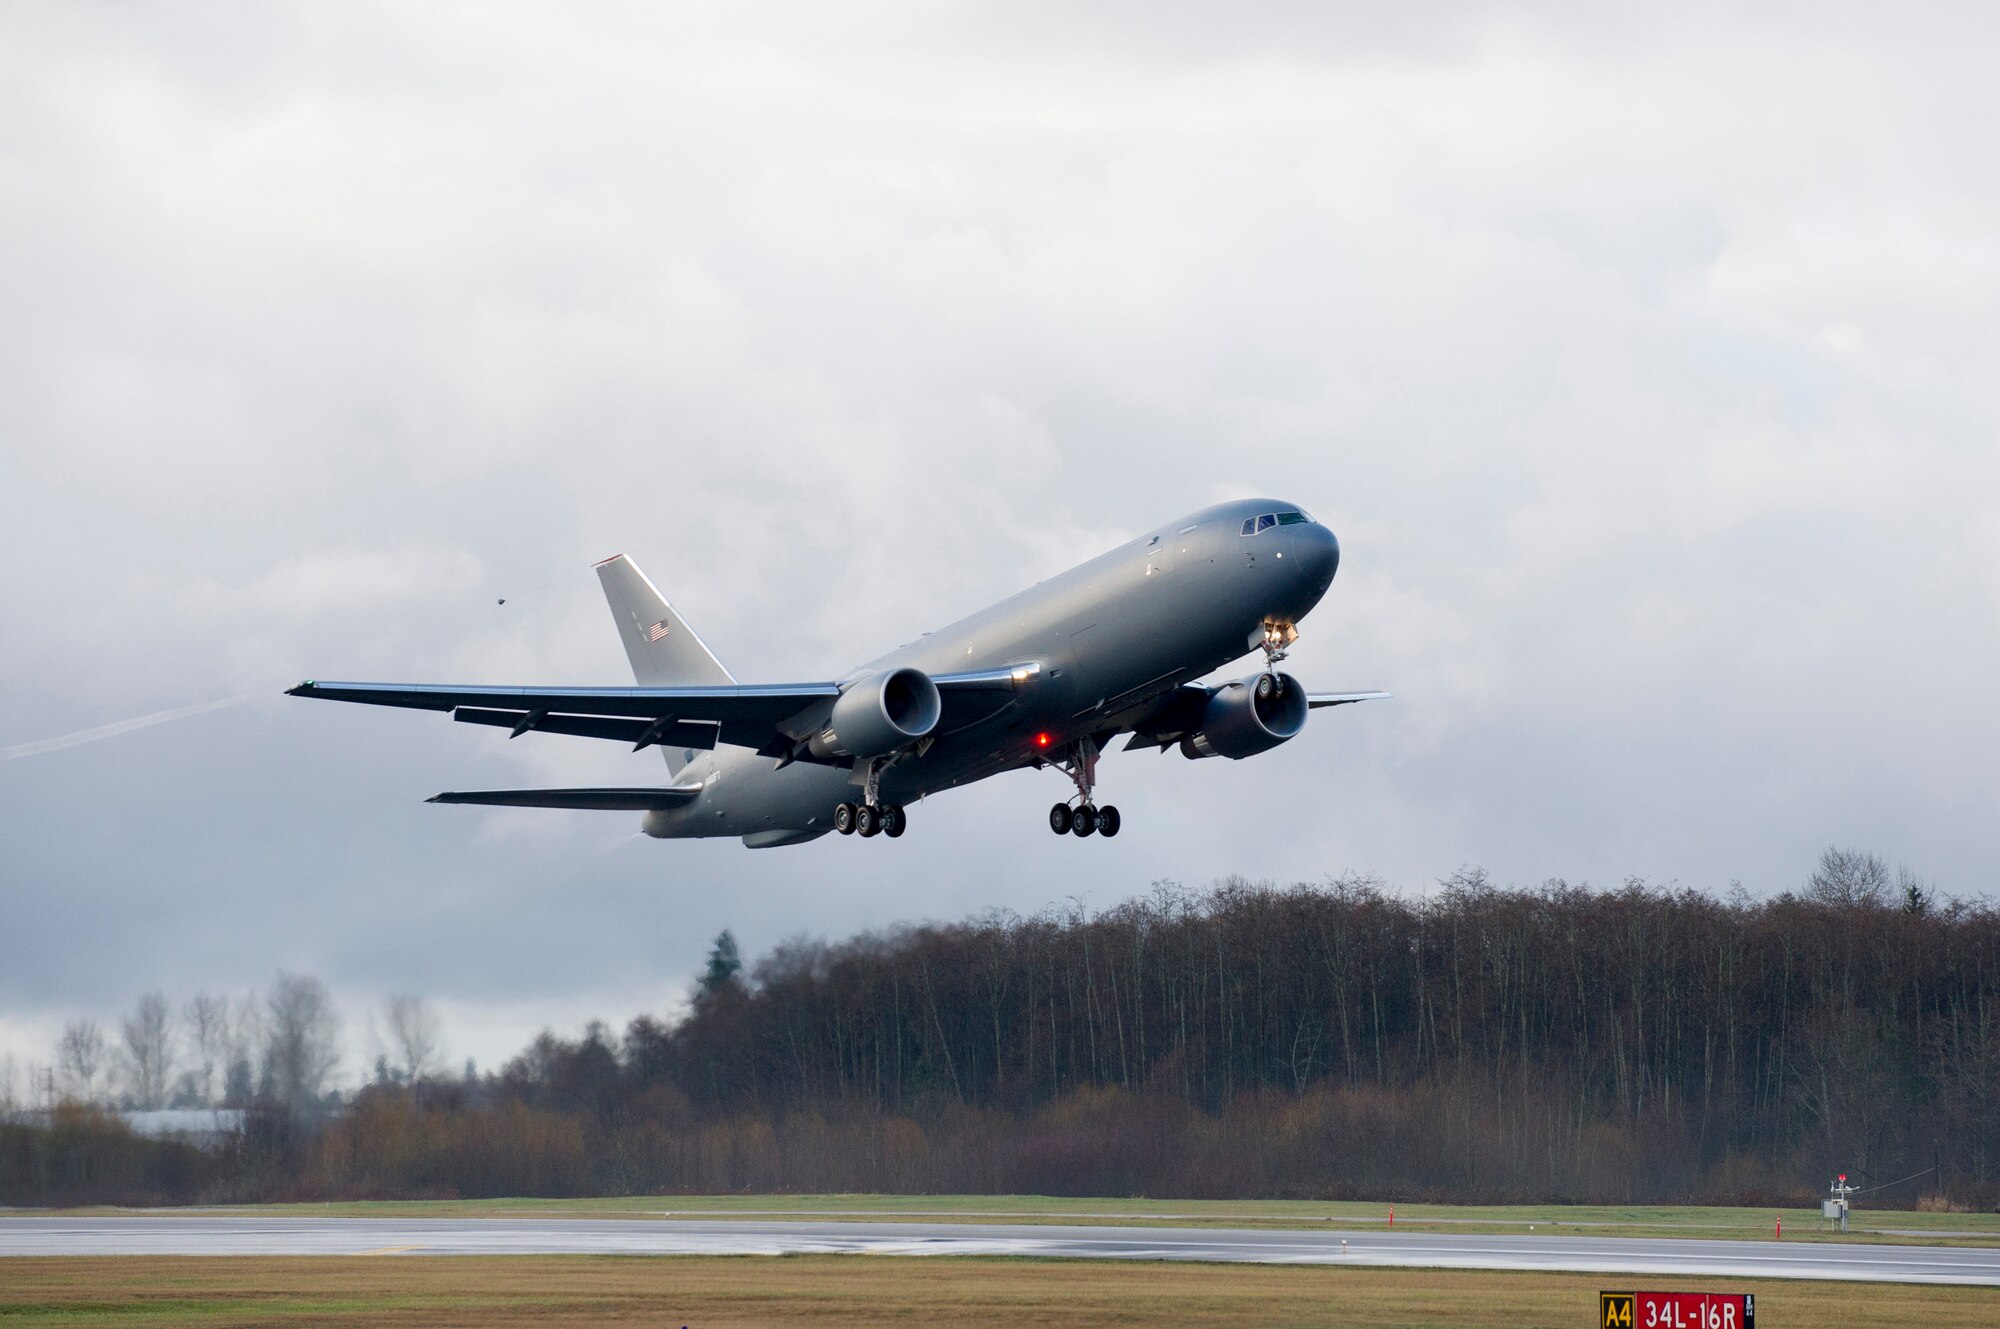 Boeing and the U.S. Air Force successfully completed the first flight of the KC-46 tanker test program today. The plane, a Boeing 767-2C, took off from Paine Field, Wash., at 9:29 a.m. (PST) and landed three hours and 32 minutes later at Boeing Field. The aircraft will receive its military systems following certification. (photo courtesy of Boeing)